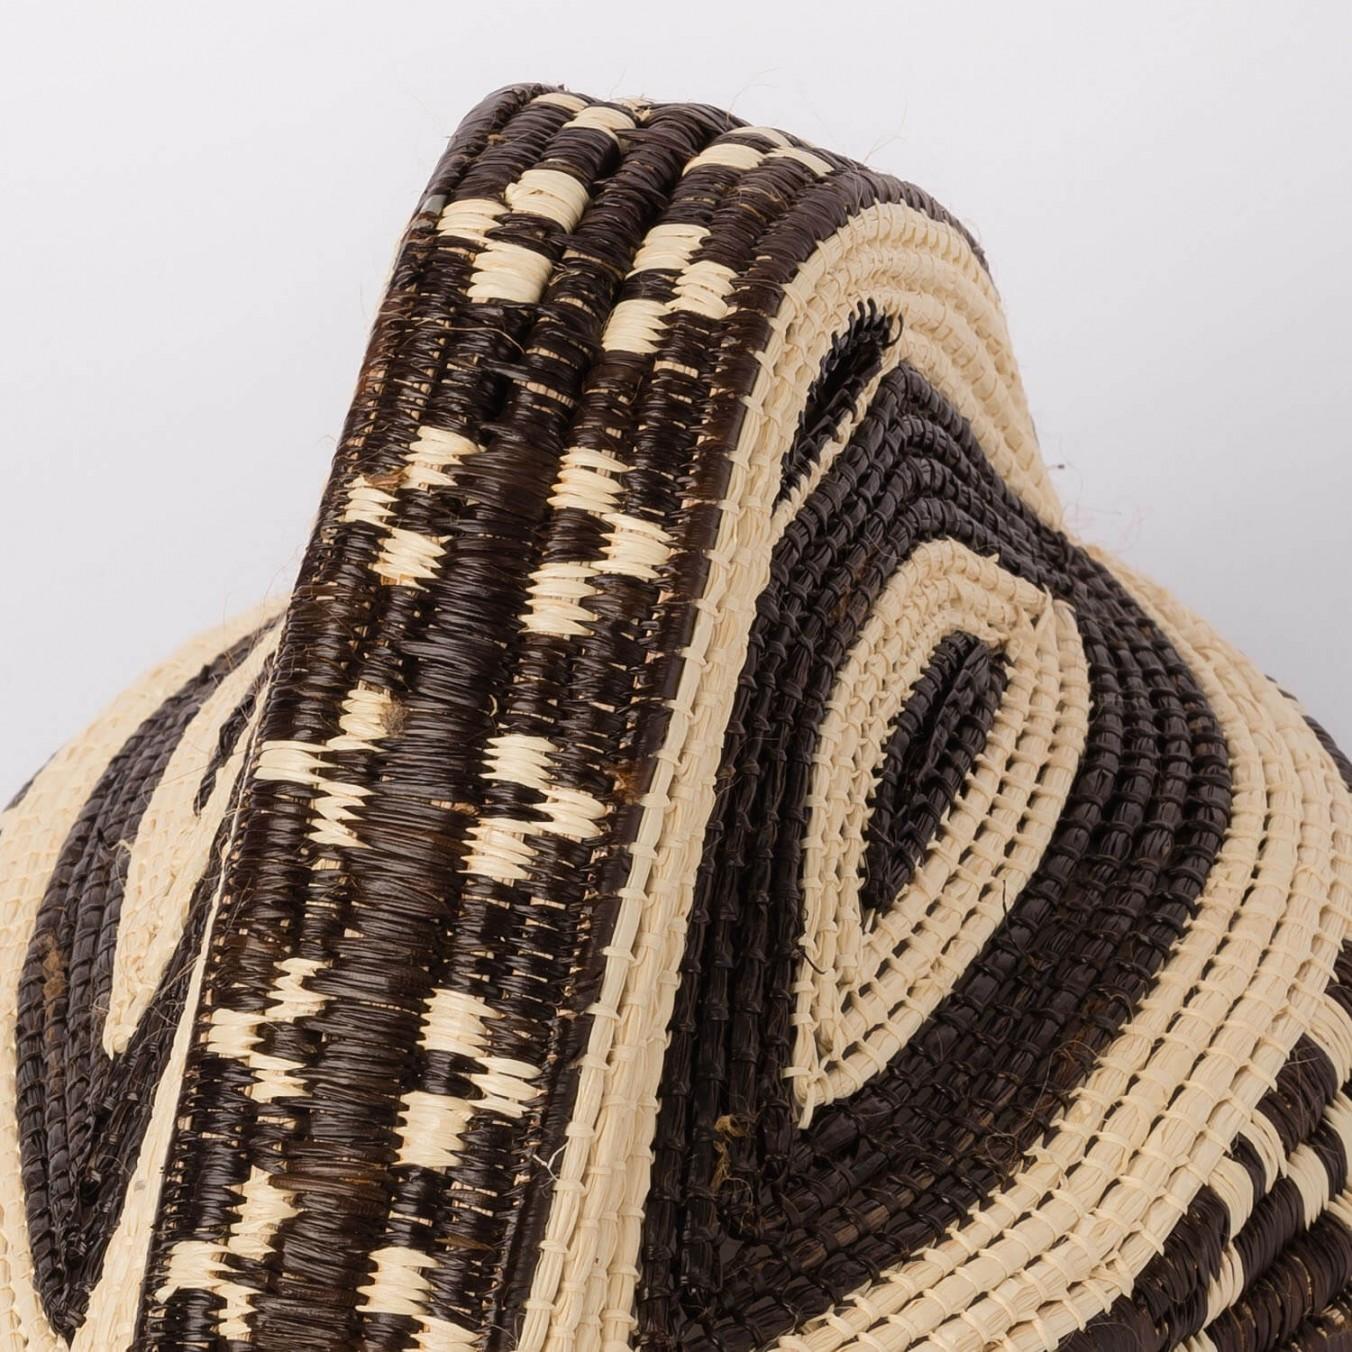 Contemporary Decorative hand-woven mask from Panama, Mascara by Ethic&Tropic For Sale